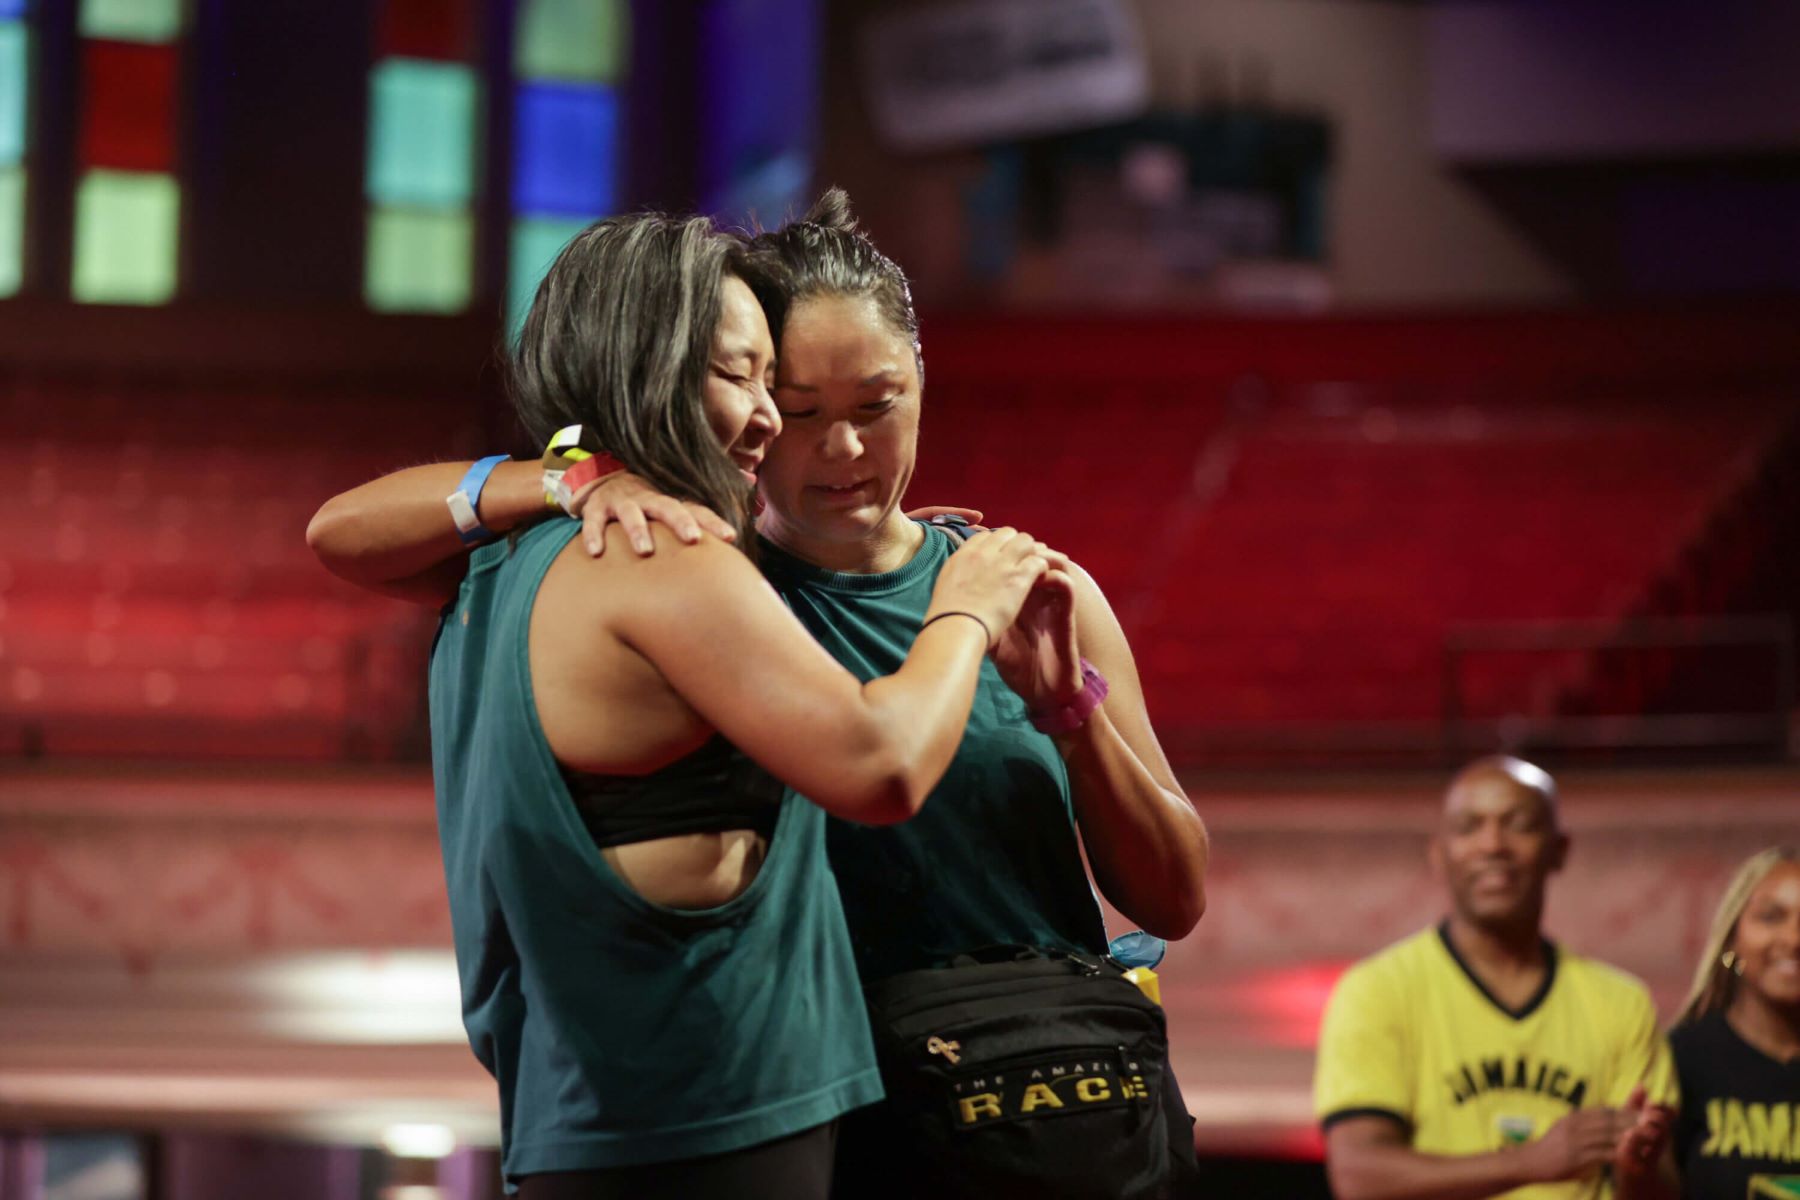 Emily Bushnell and Molly Sinert, one of the teams who competed in 'The Amazing Race' Season 34, hug at the finish line.